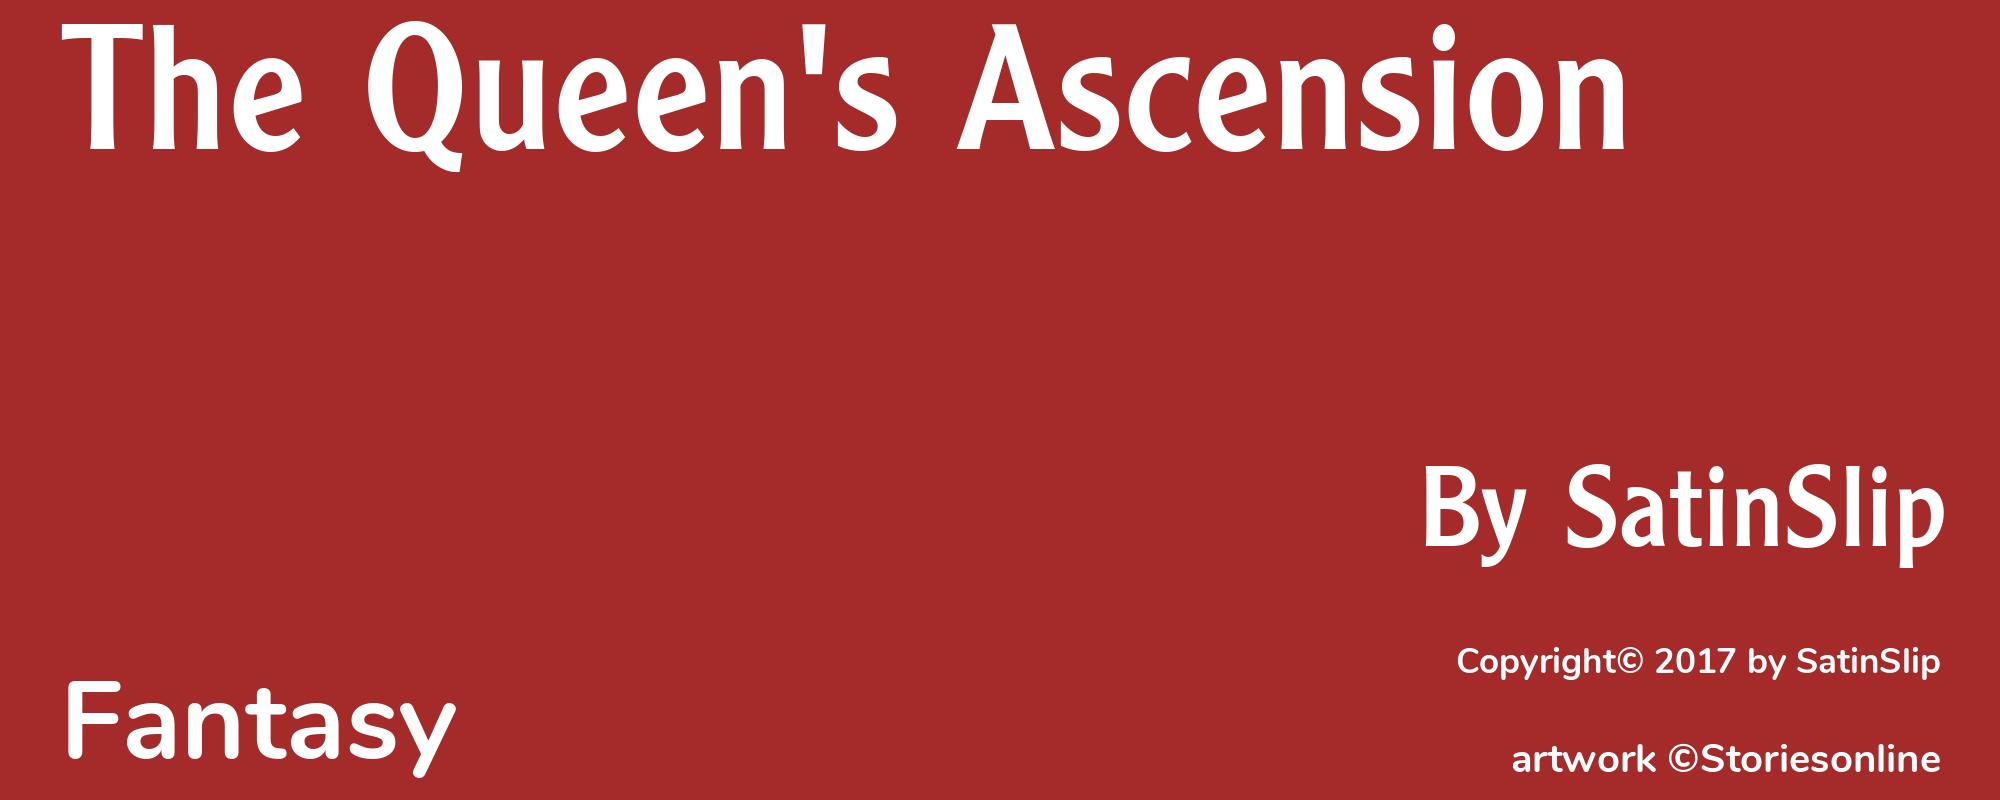 The Queen's Ascension - Cover